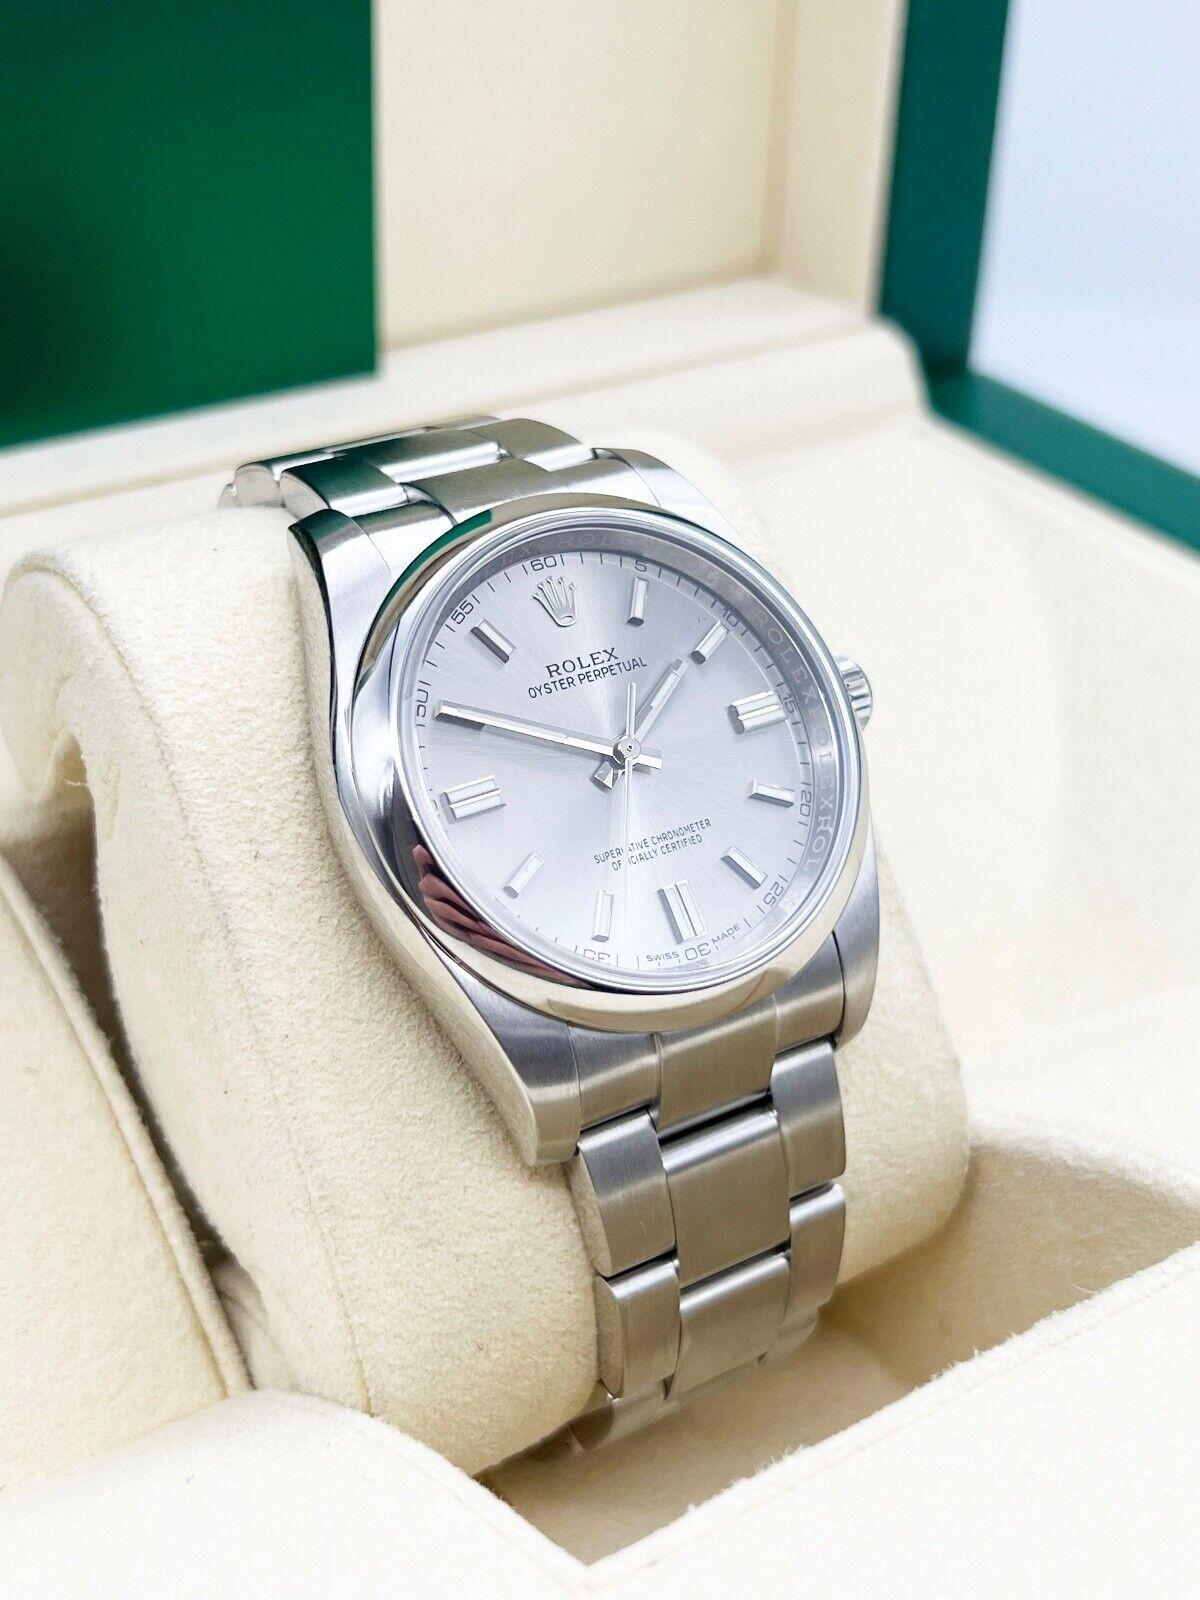 Style Number: 116000

Serial: 155V1***

Year: 2018
 
Model: Oyster Perpetual
 
Case Material: Stainless Steel
 
Band: Stainless Steel
  
Bezel: Stainless Steel
  
Dial: Silver
 
Face: Sapphire Crystal
 
Case Size: 36mm
 
Includes: 
-Rolex Box &